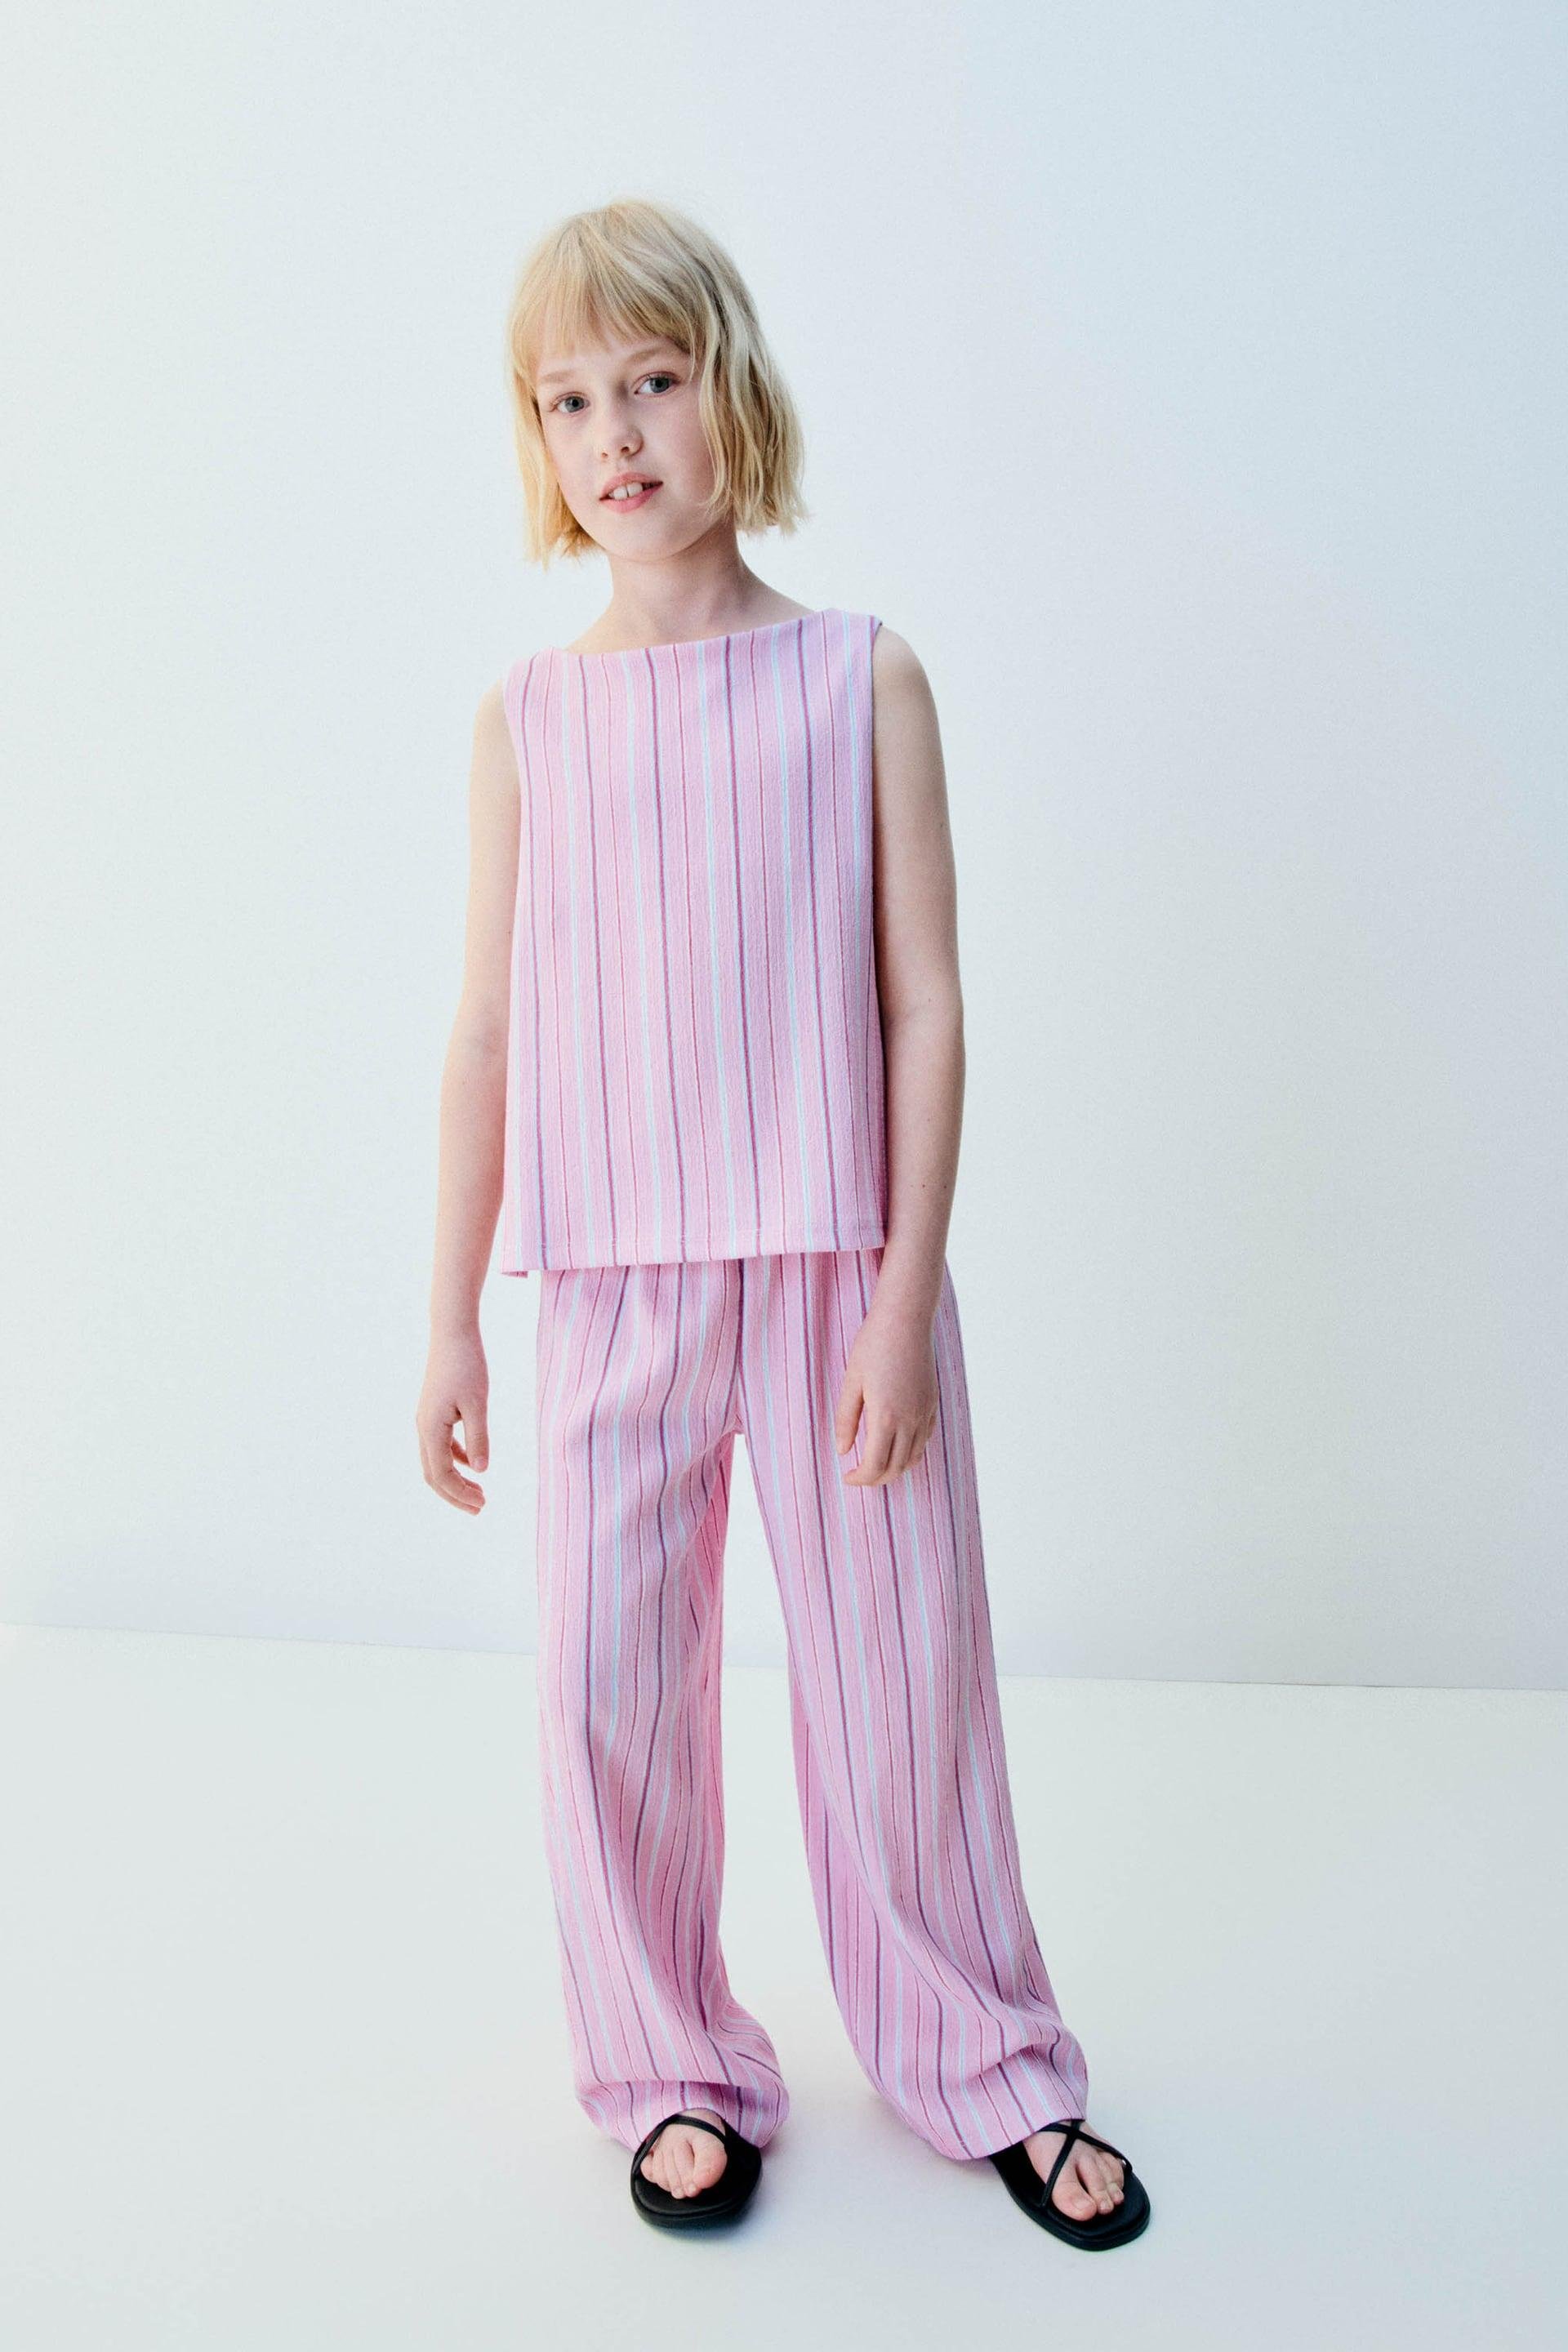 TEXTURED STRIPED TOP AND PANTS SET by ZARA